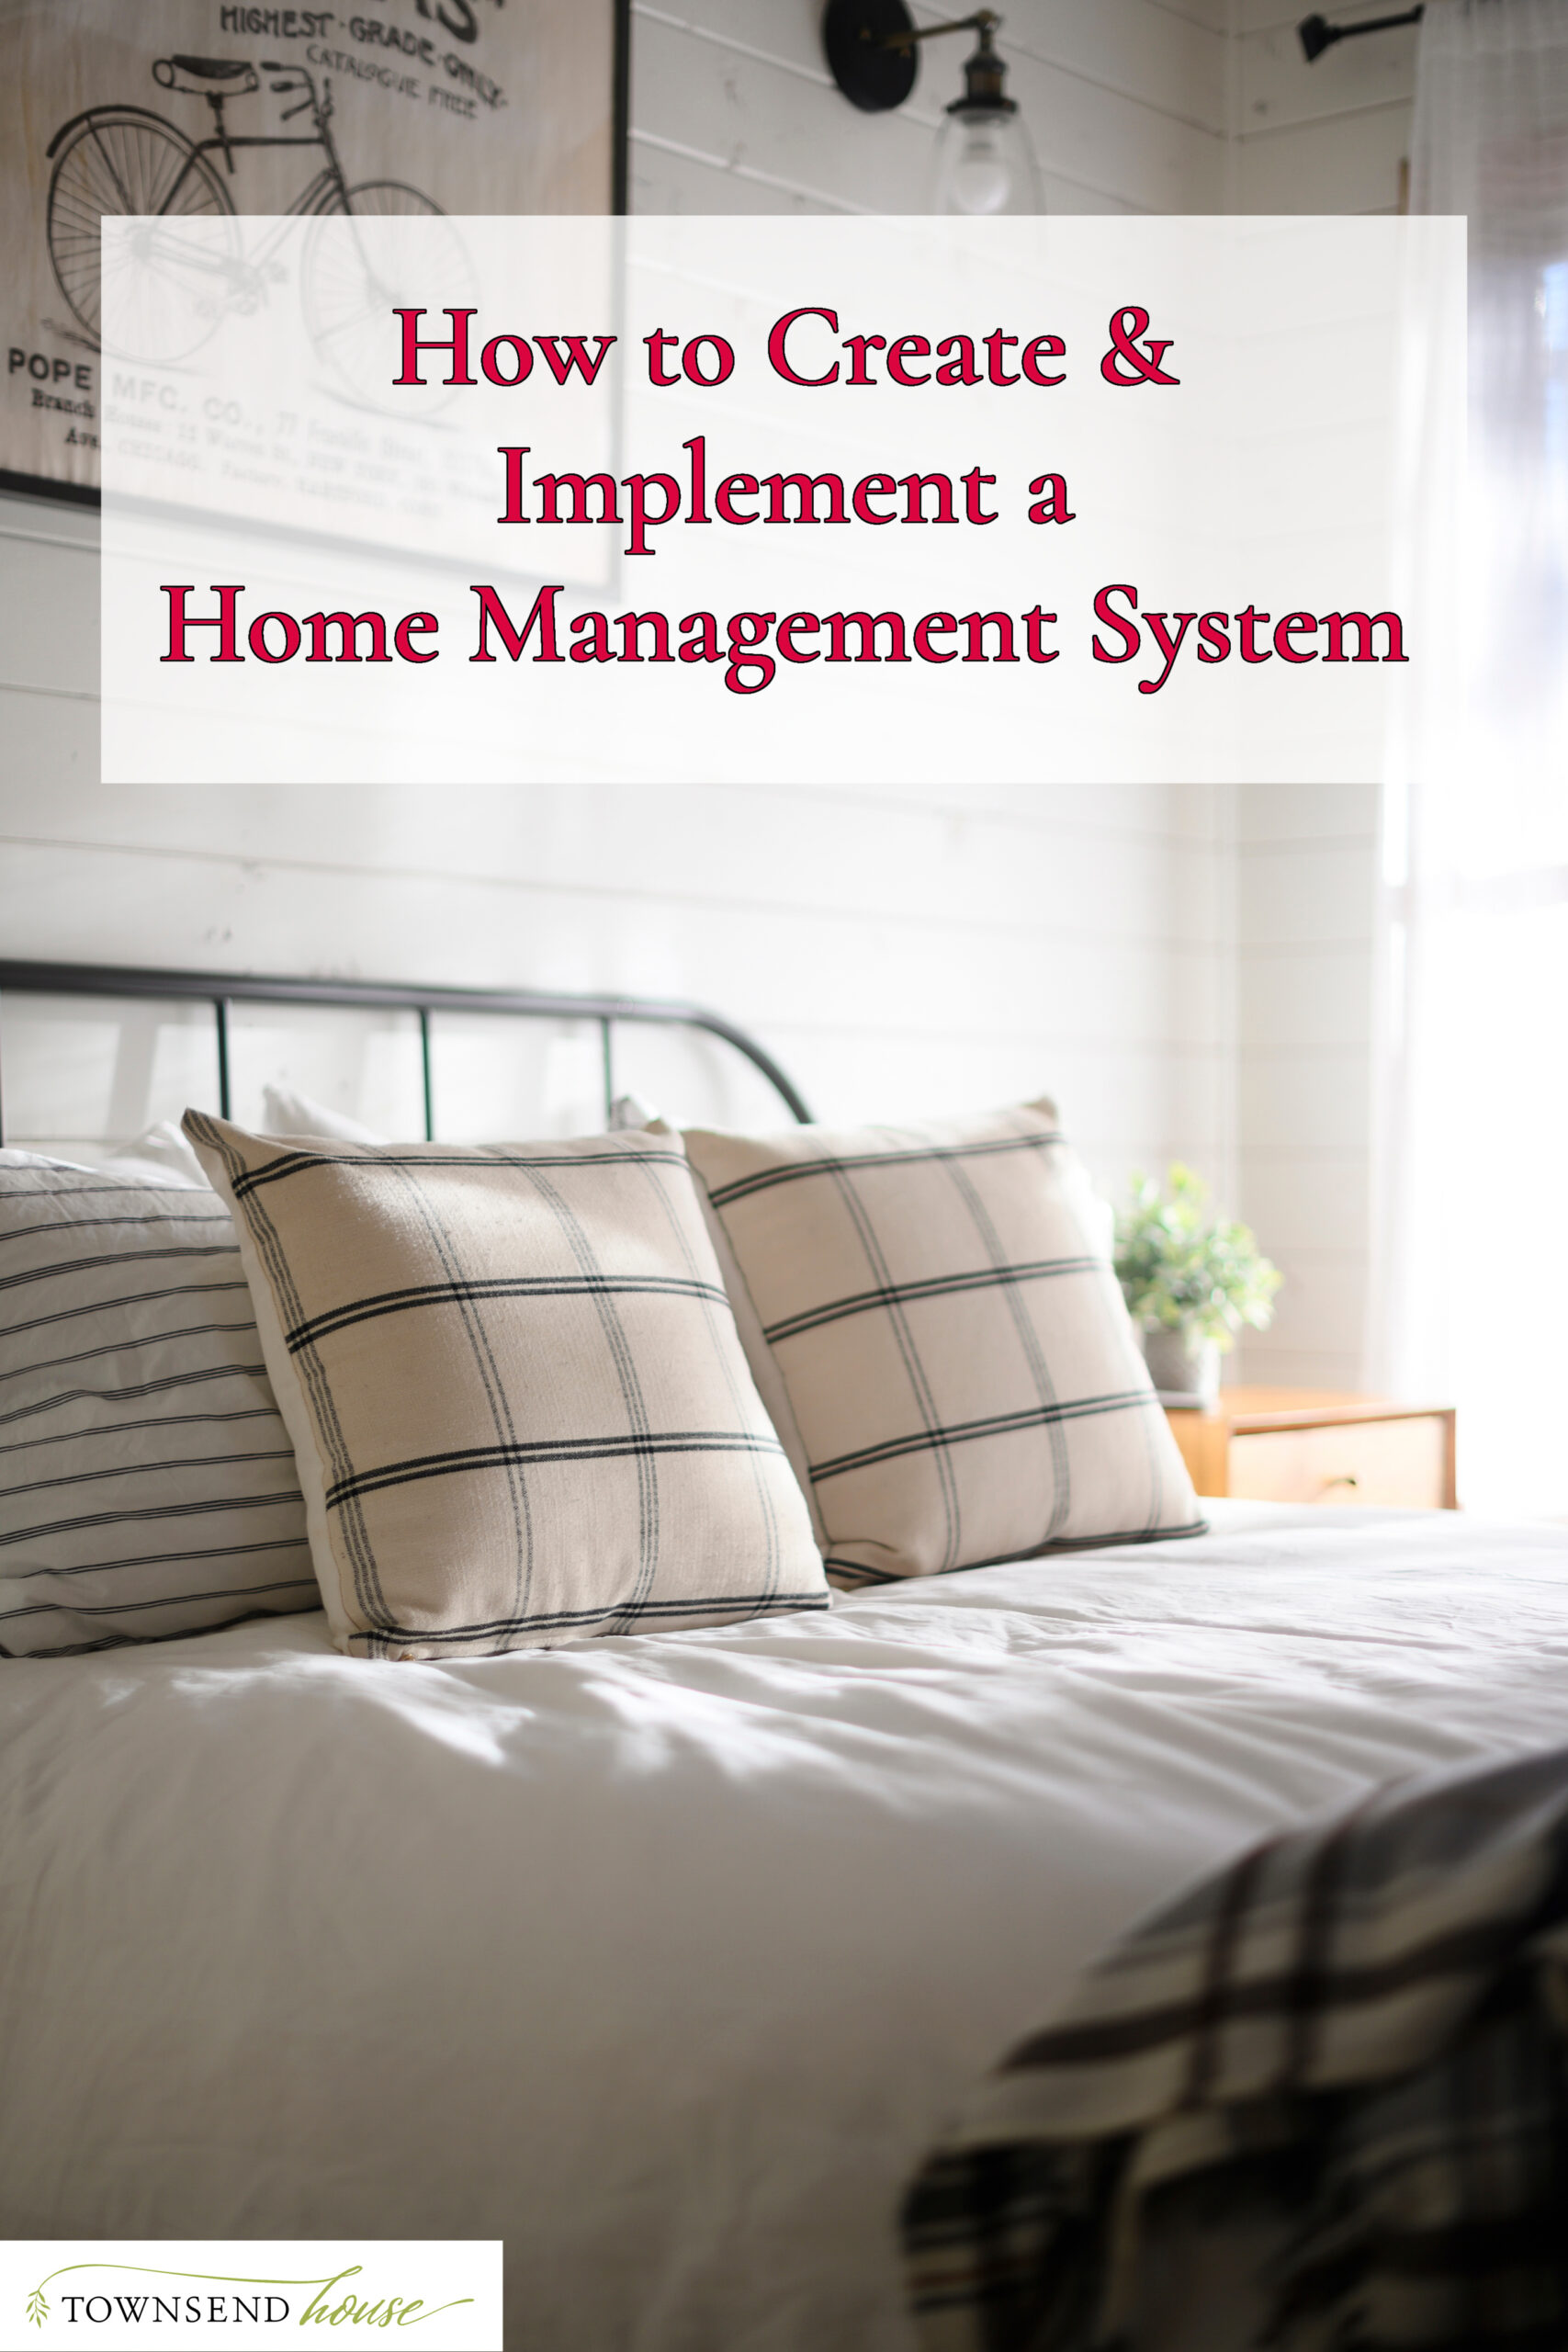 How to Create & Implement a Home Management System